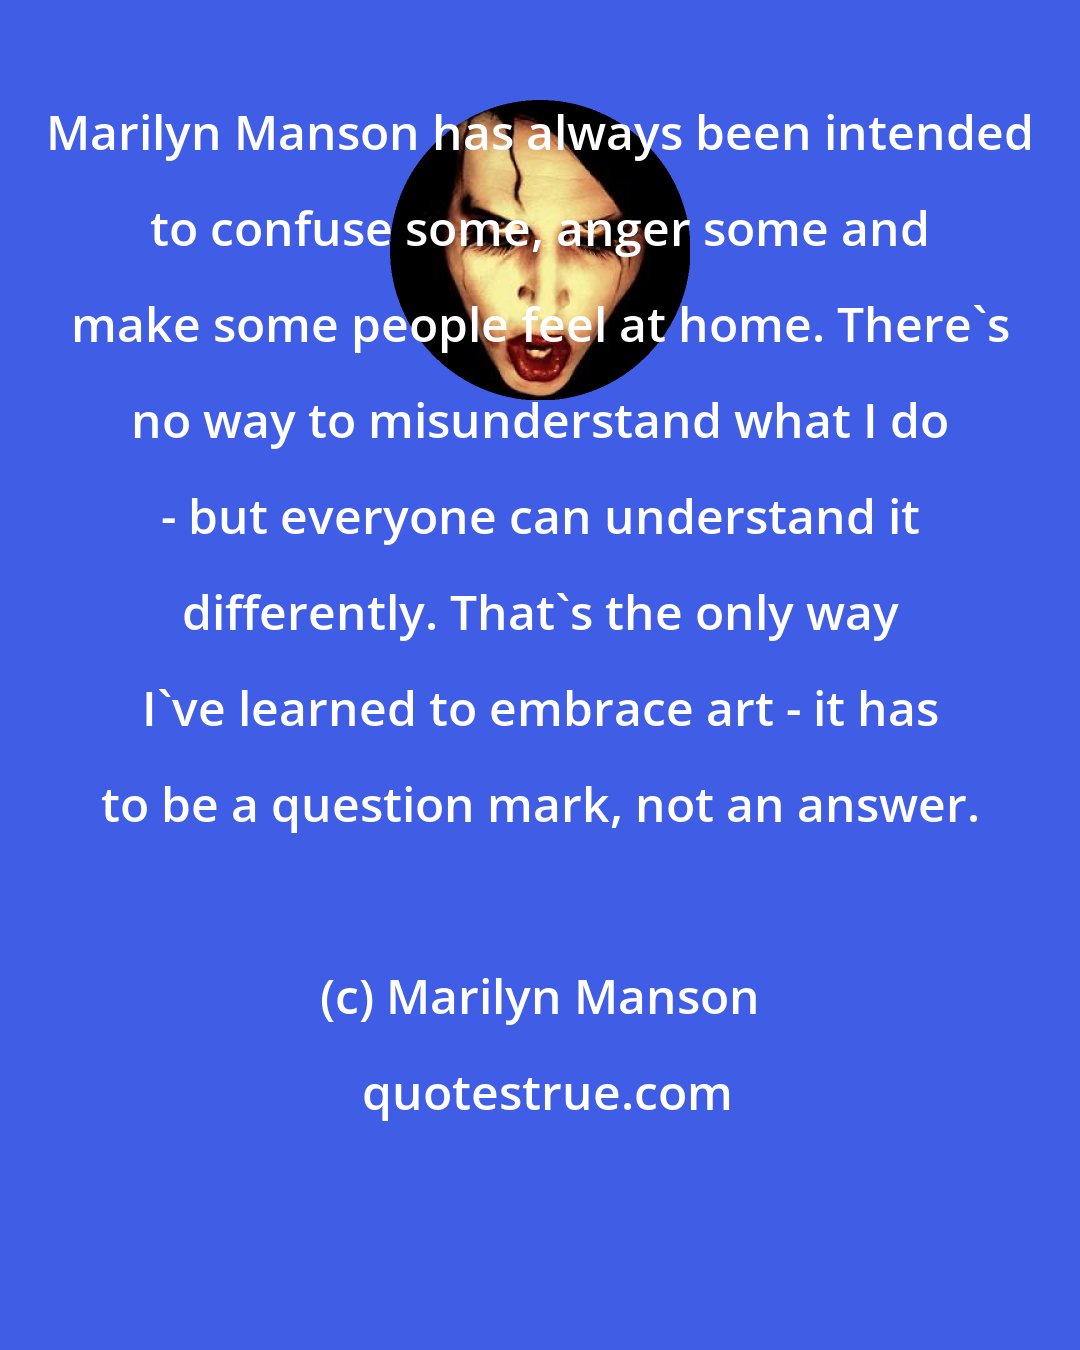 Marilyn Manson: Marilyn Manson has always been intended to confuse some, anger some and make some people feel at home. There's no way to misunderstand what I do - but everyone can understand it differently. That's the only way I've learned to embrace art - it has to be a question mark, not an answer.